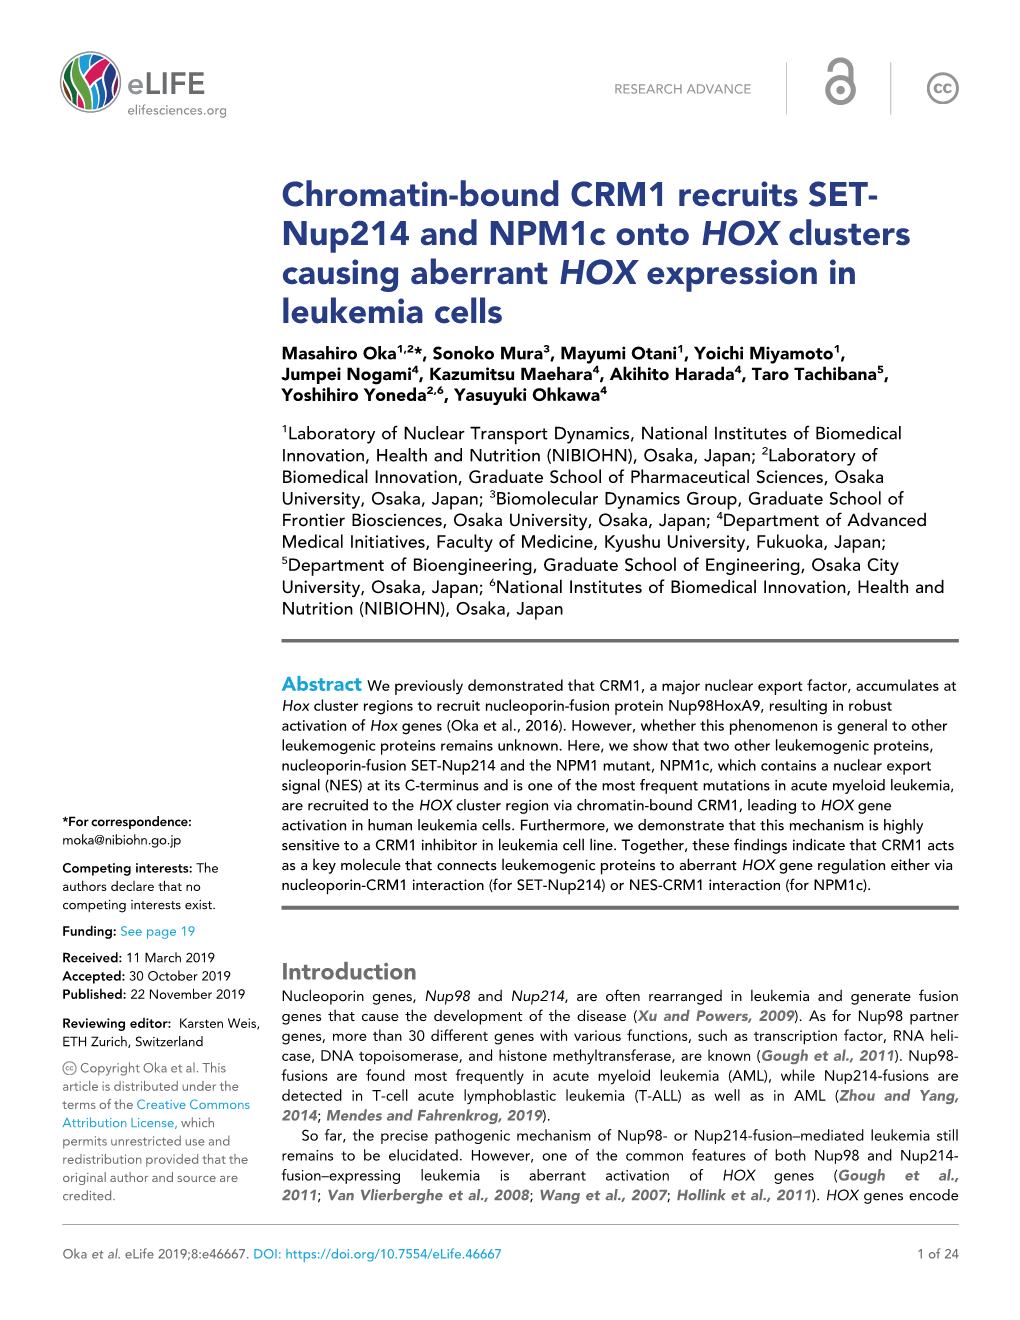 Chromatin-Bound CRM1 Recruits SET- Nup214 and Npm1c Onto